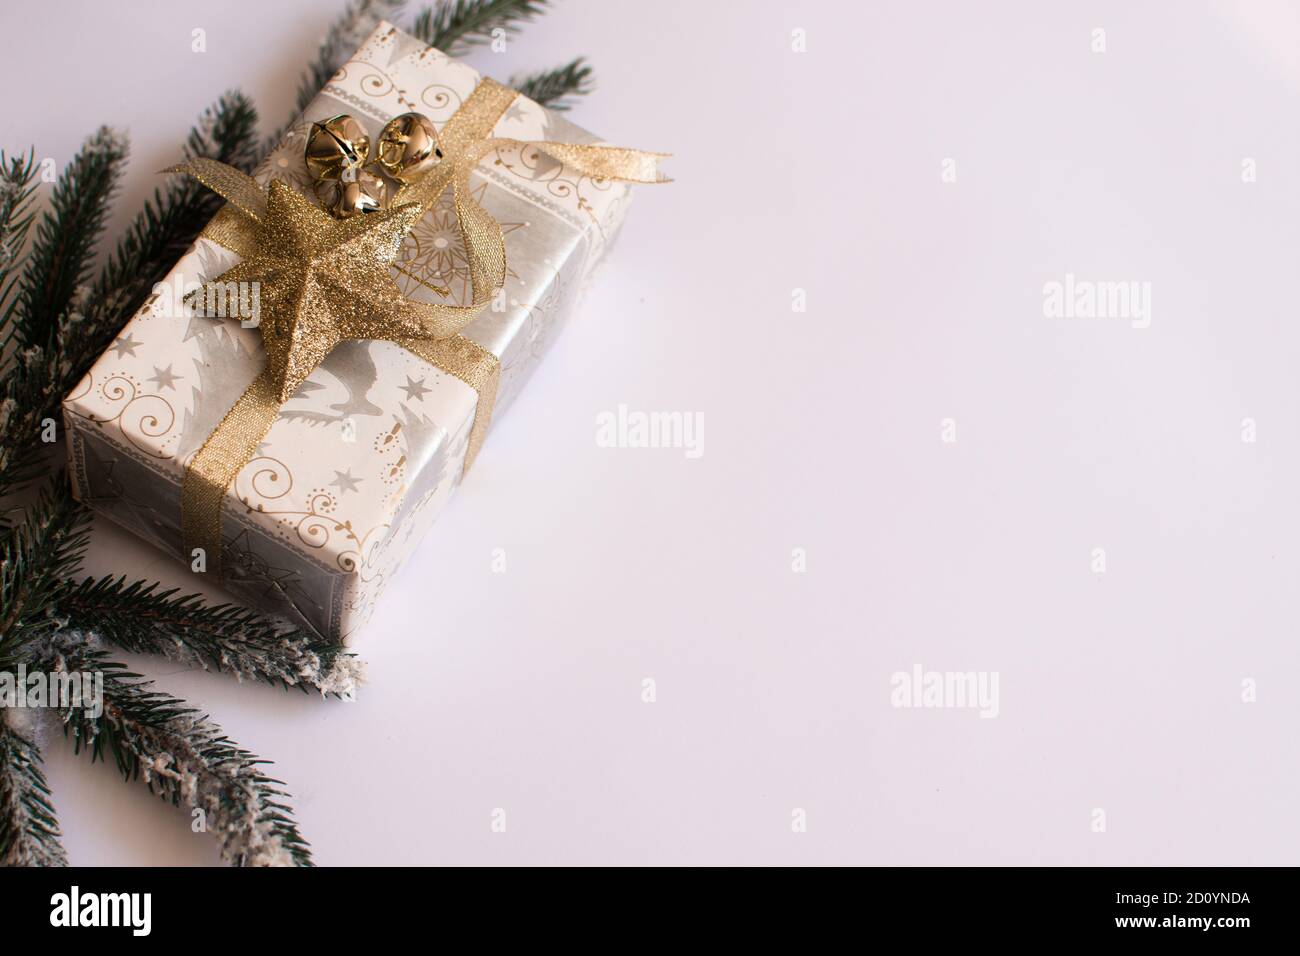 christmas layout gift and spruce branch on white background, place for inscription Stock Photo